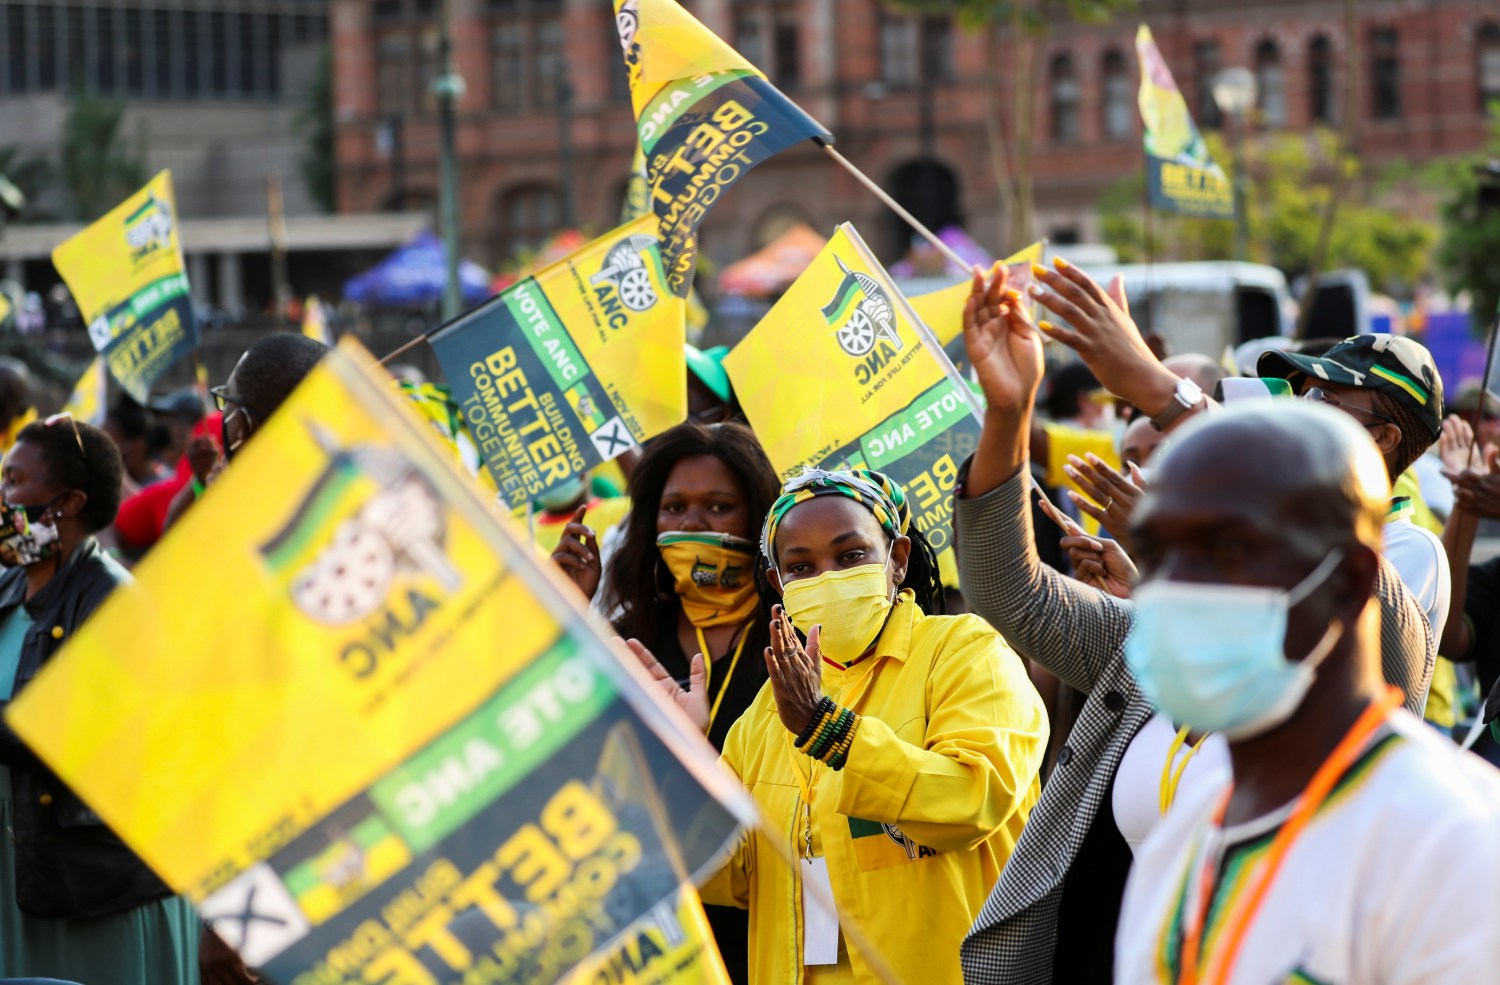 Supporters of the African National Congress (ANC) sing slogans ahead of the launch of an election manifesto at the church square in Pretoria, South Africa, September 27, 2021. REUTERS/Siphiwe Sibeko